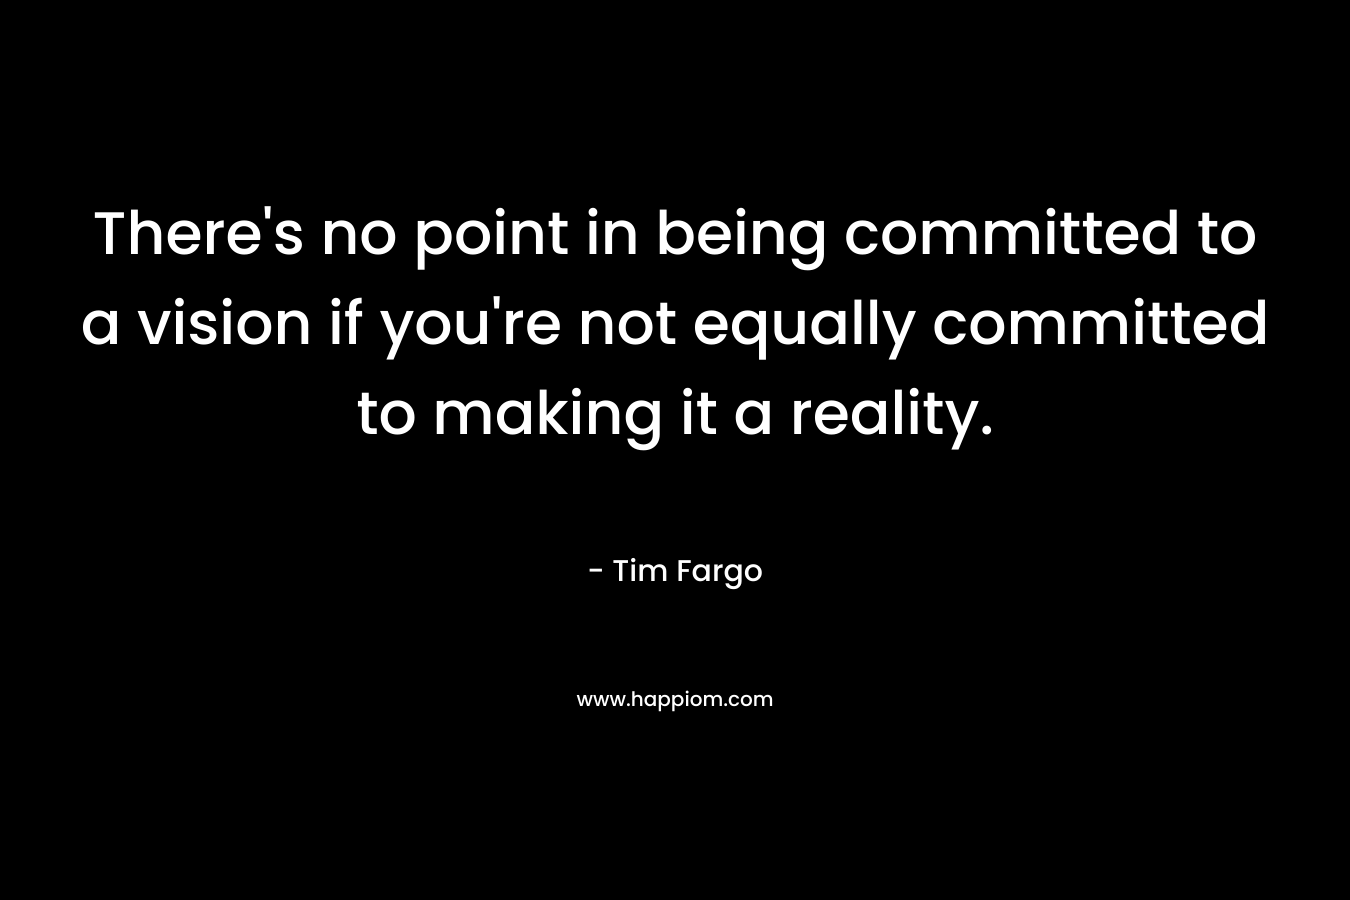 There's no point in being committed to a vision if you're not equally committed to making it a reality.